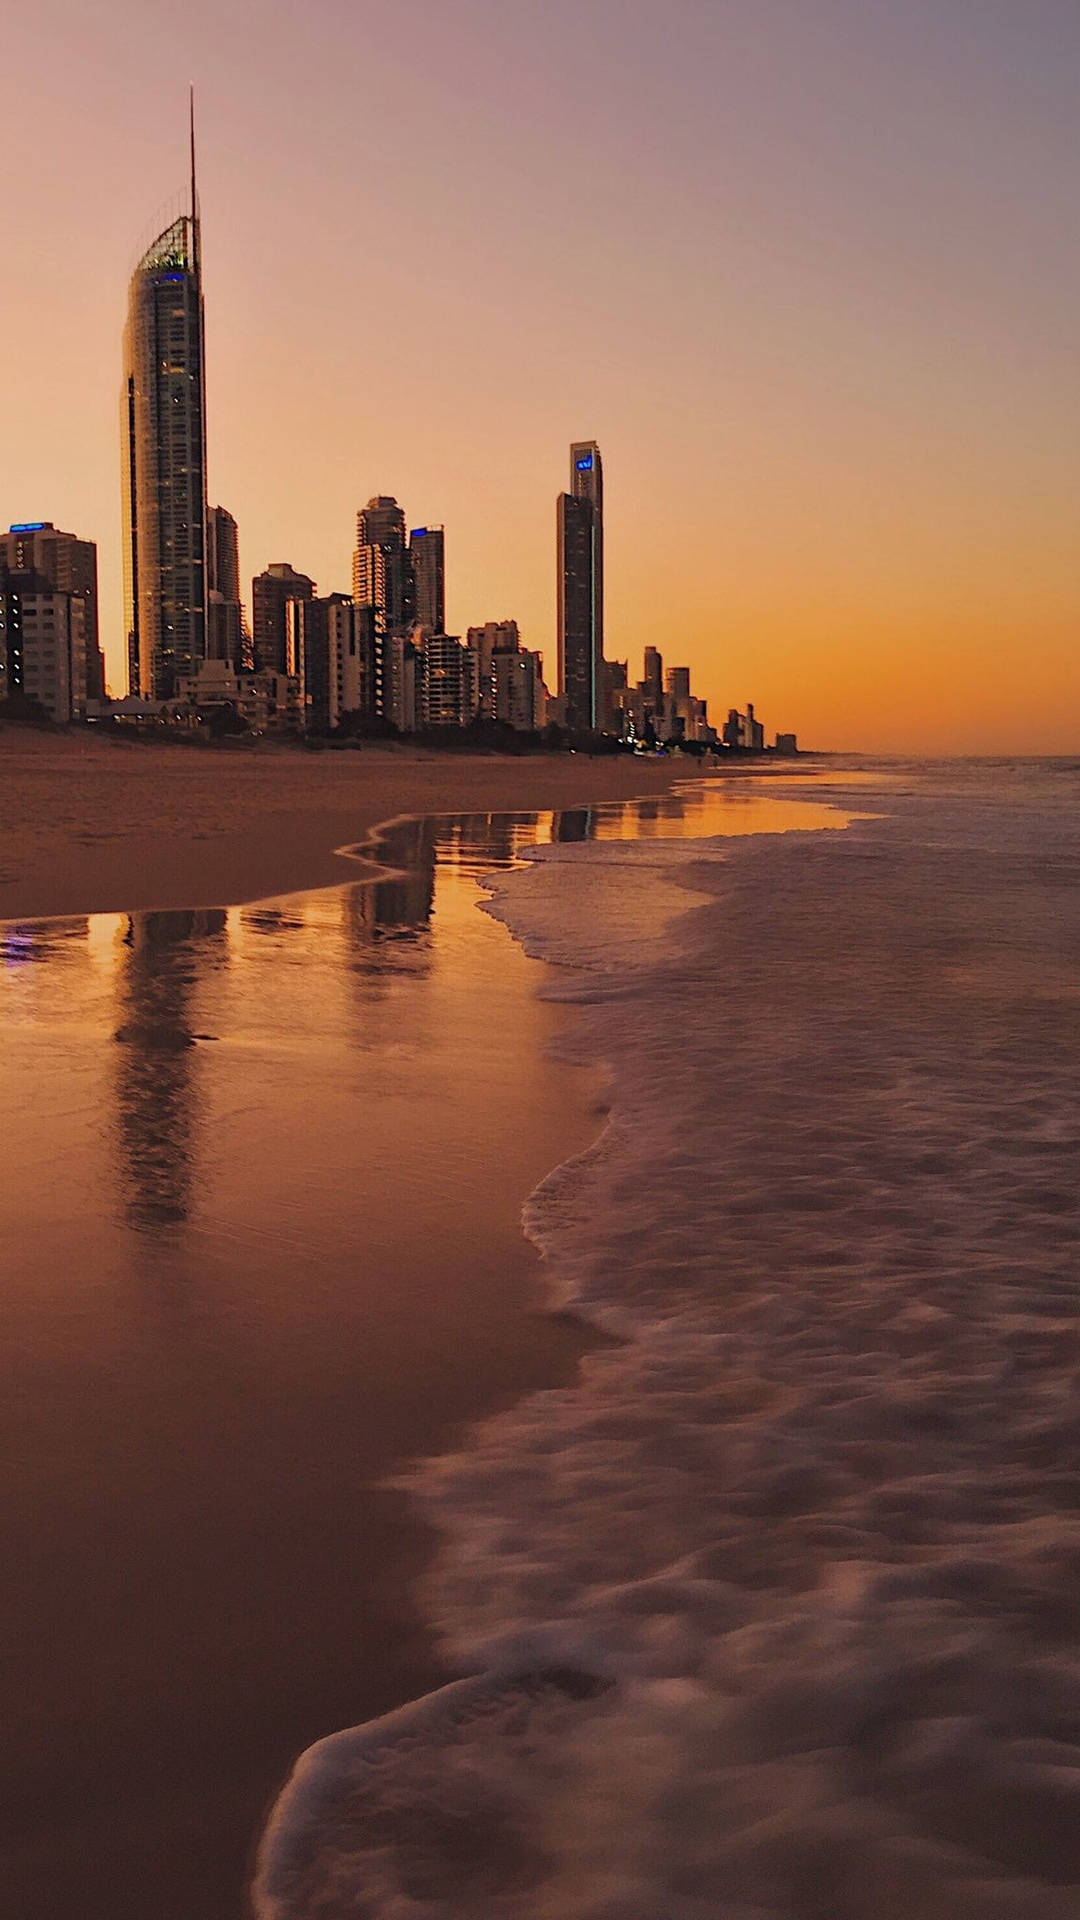 4k Iphone City During Sunset On Beach